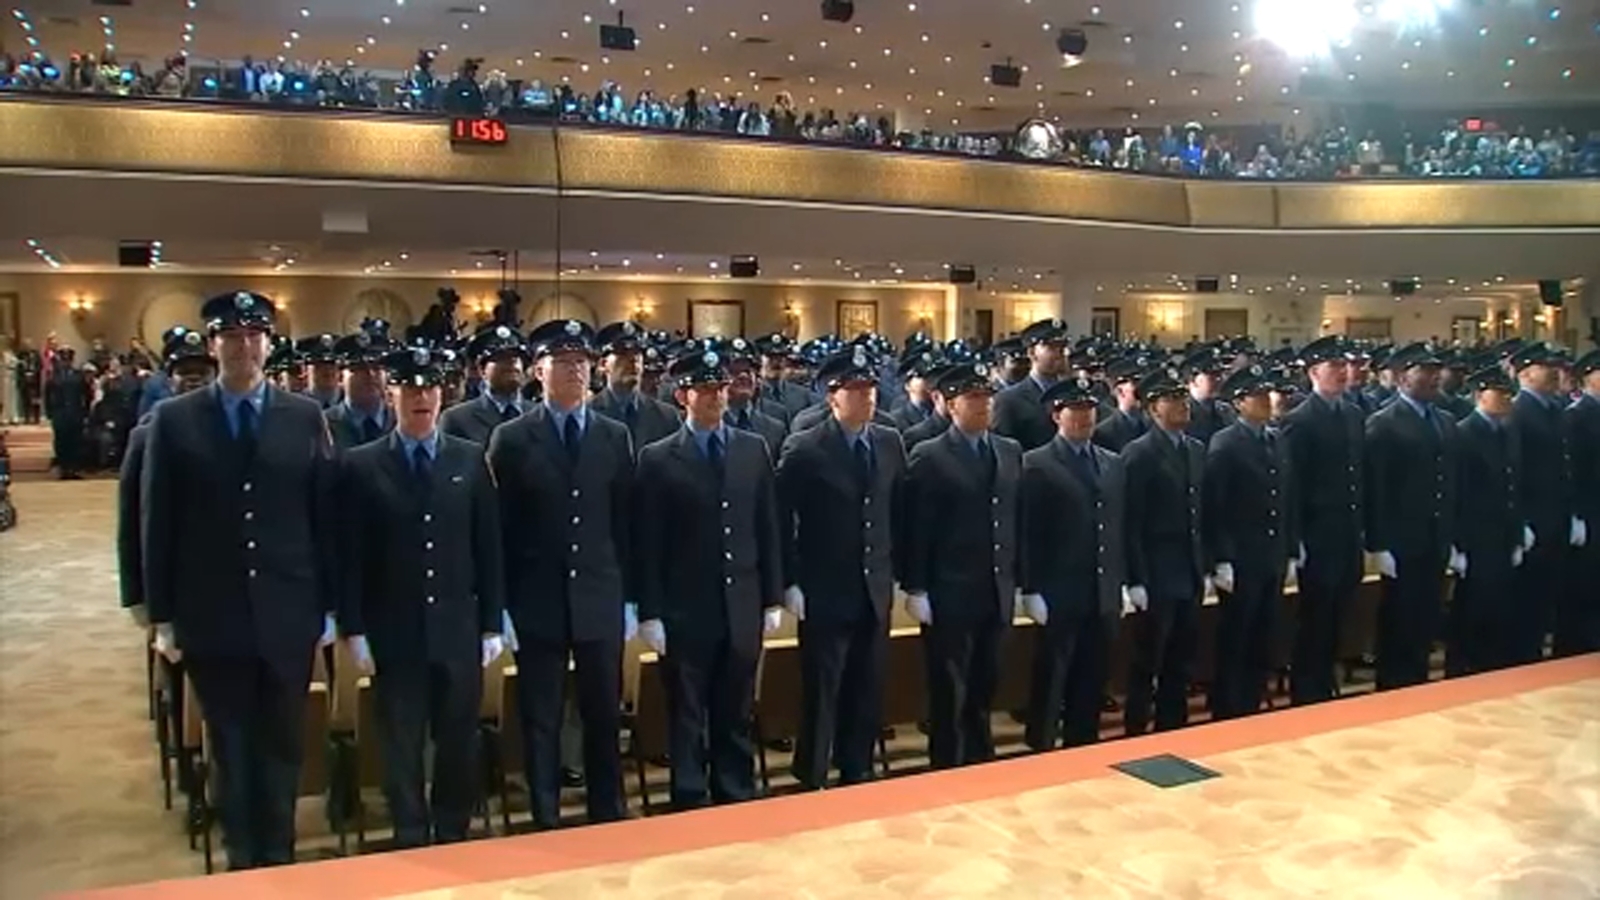 Latest FDNY graduating class represents increasing diversity in NYC department [Video]